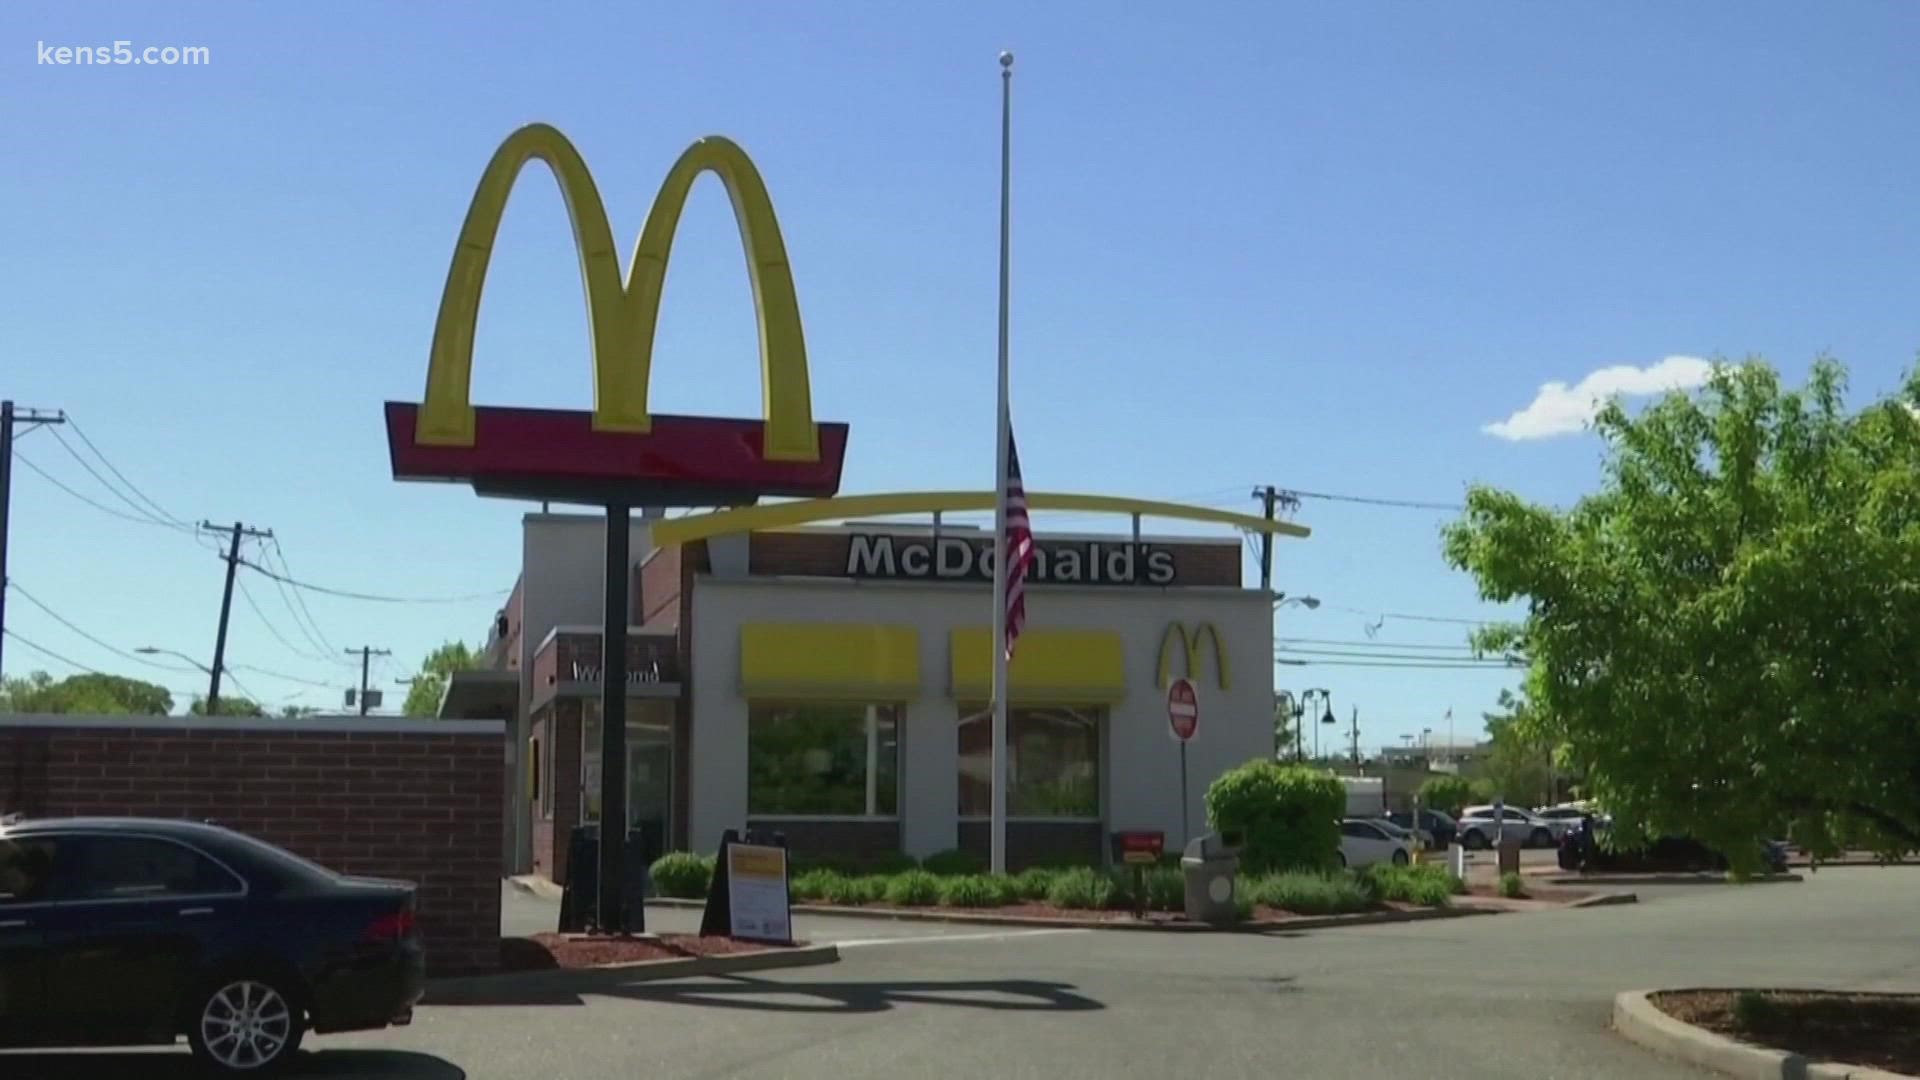 The problem with broken ice cream machines at the fast-food giant is so well known, a McDonald's ice cream fan launched his own website to track which ones work.